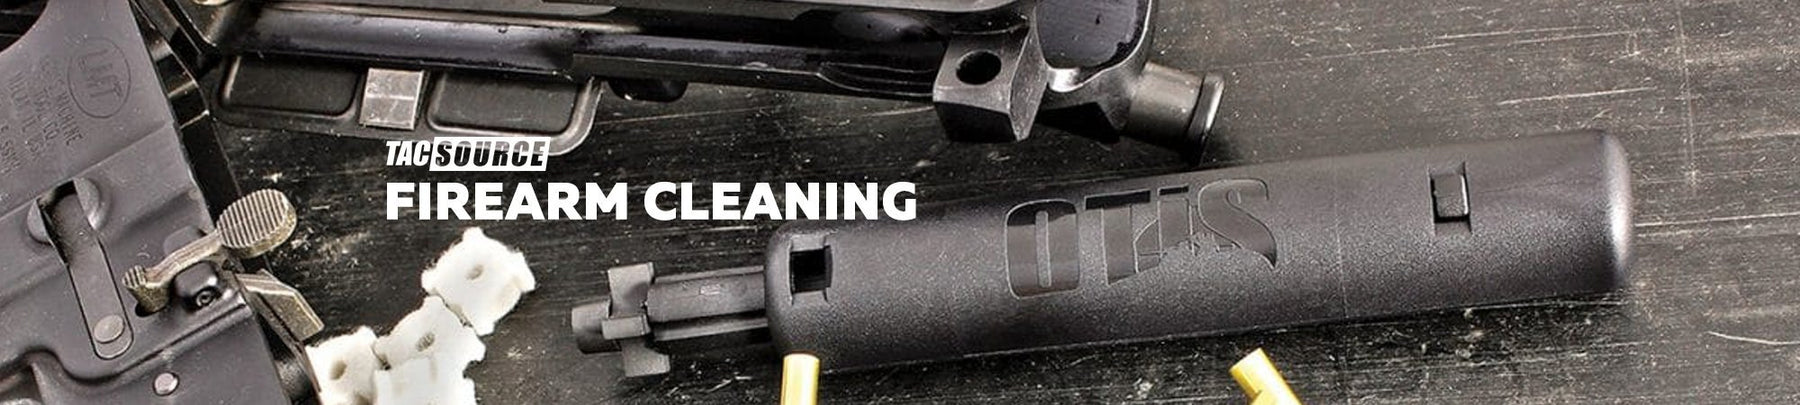 Firearm Cleaning-TacSource